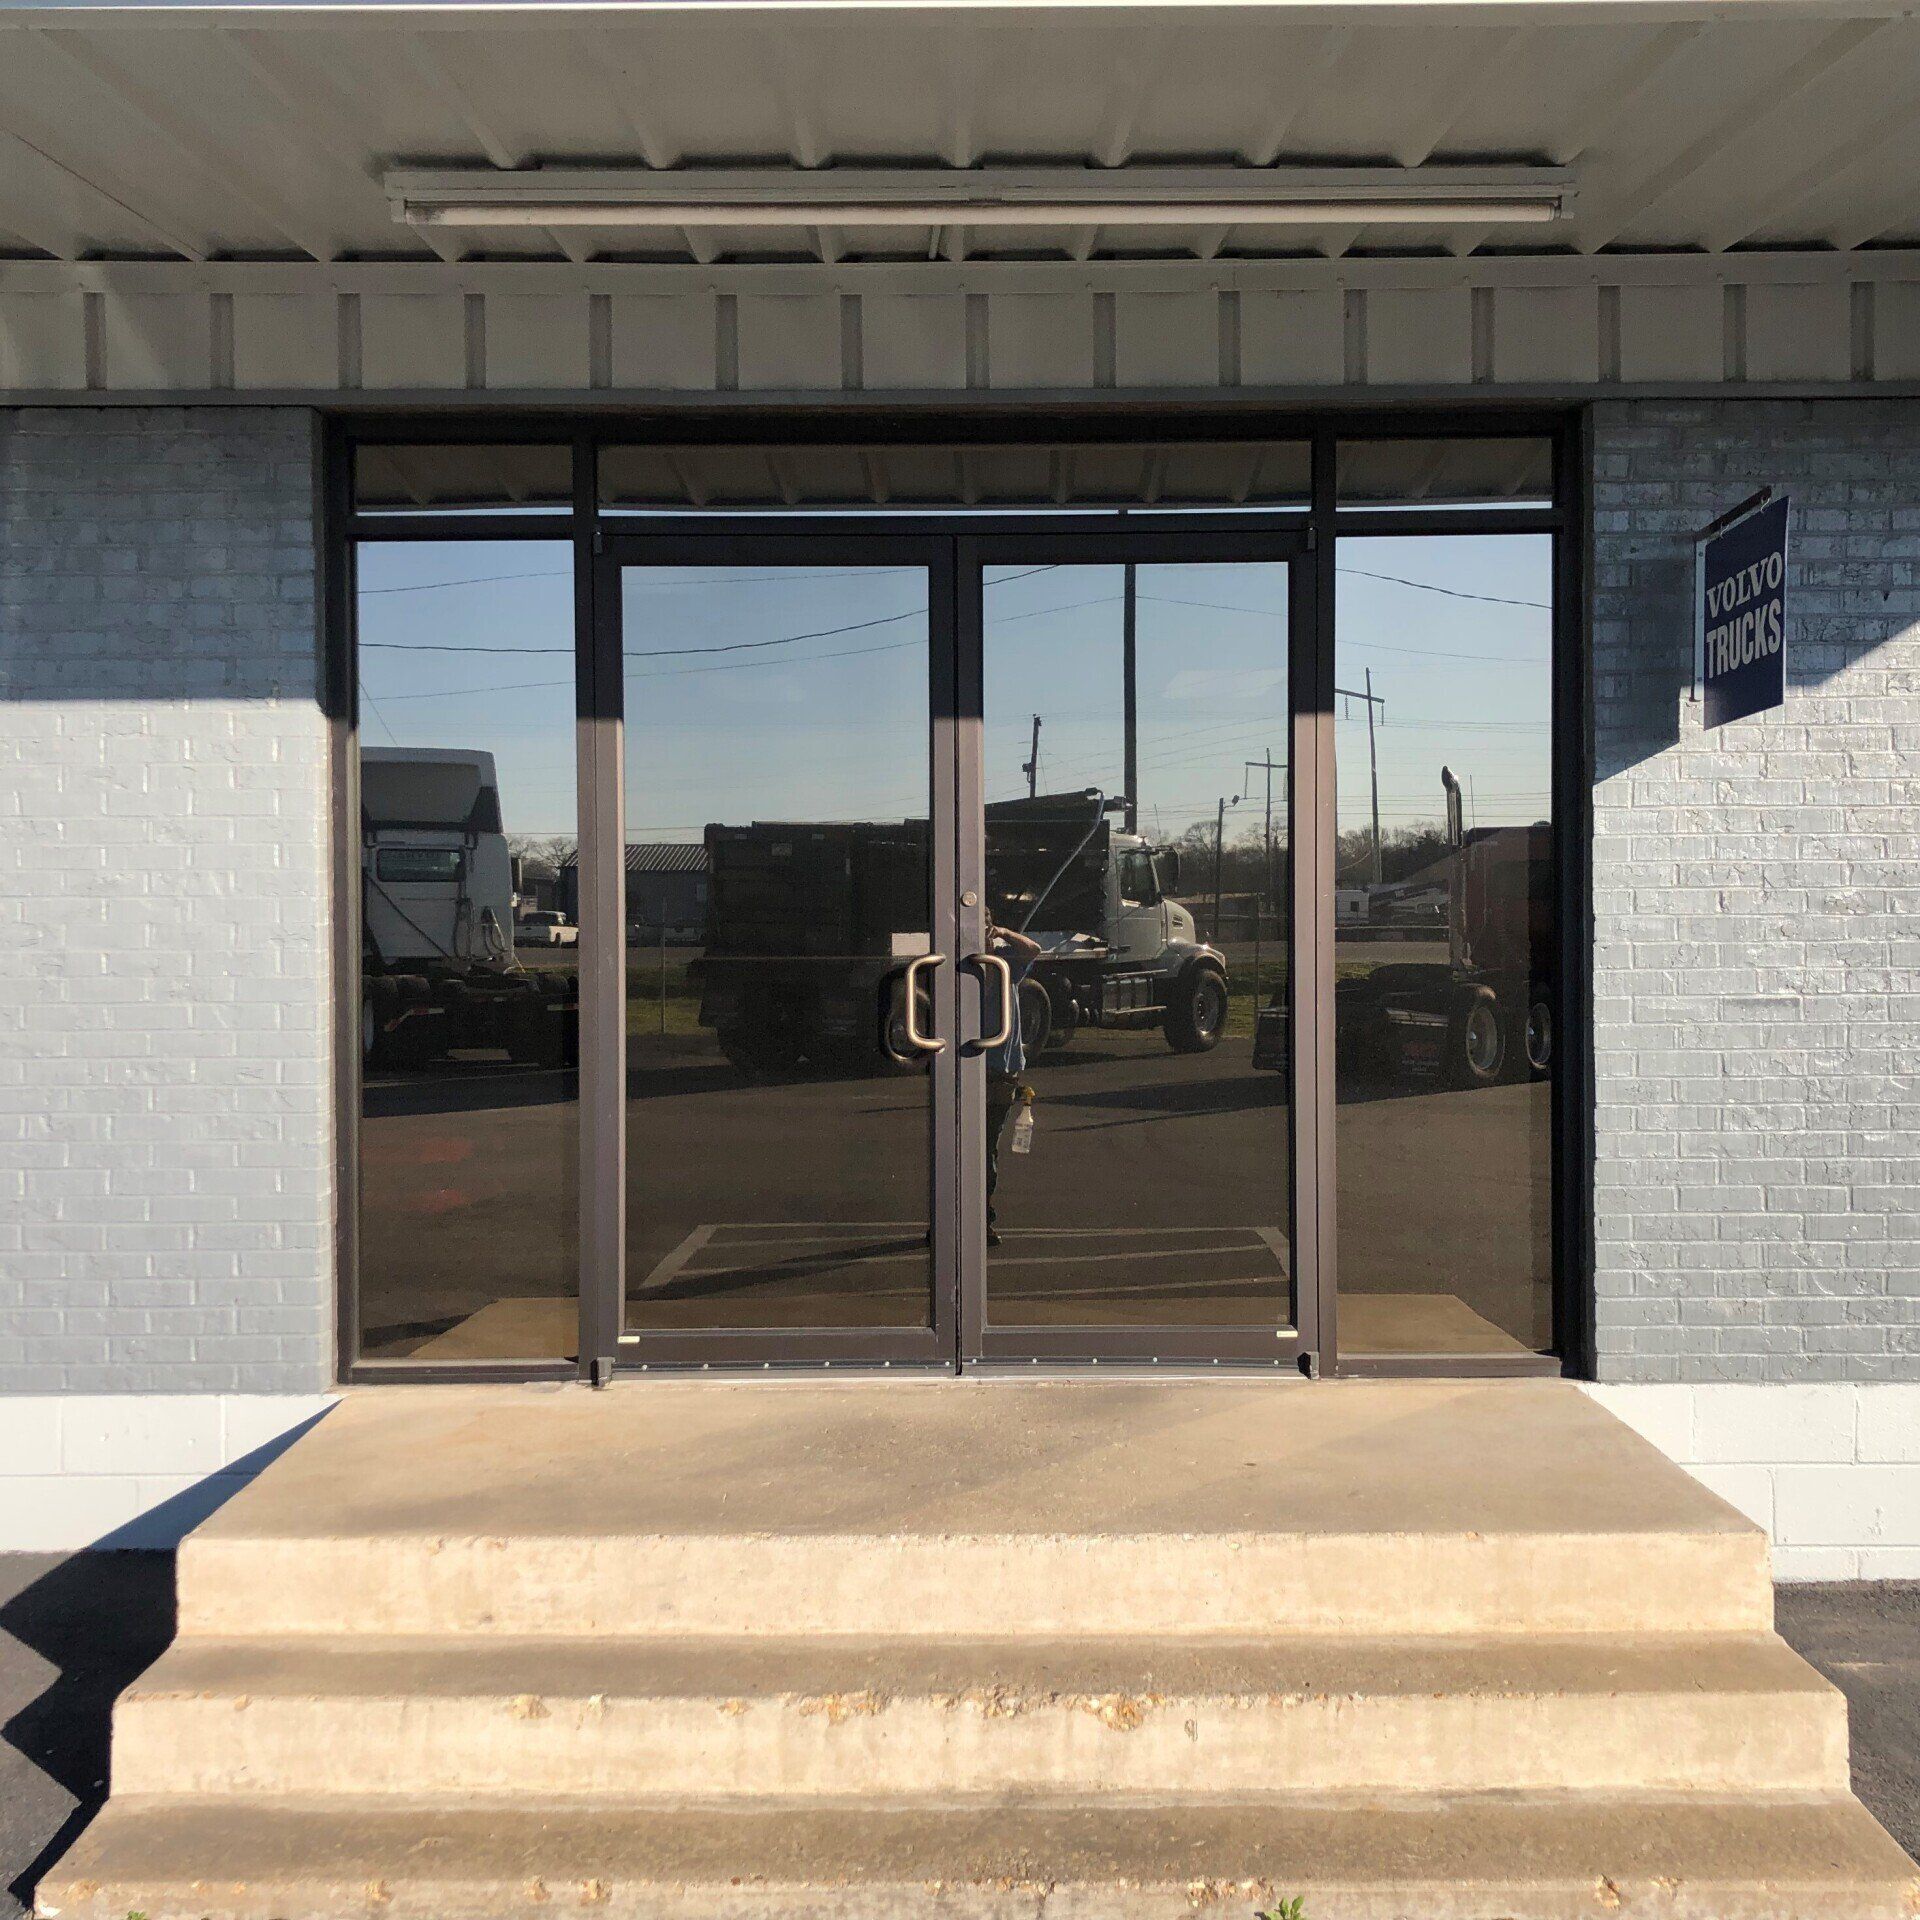 business storefront tinting - SPF Supreme View Tint Leads it's class in Performance and HD Clarity inside looking out. Volvo Trucks storefront tinted on 3.1.2021 in Montgomery, AL